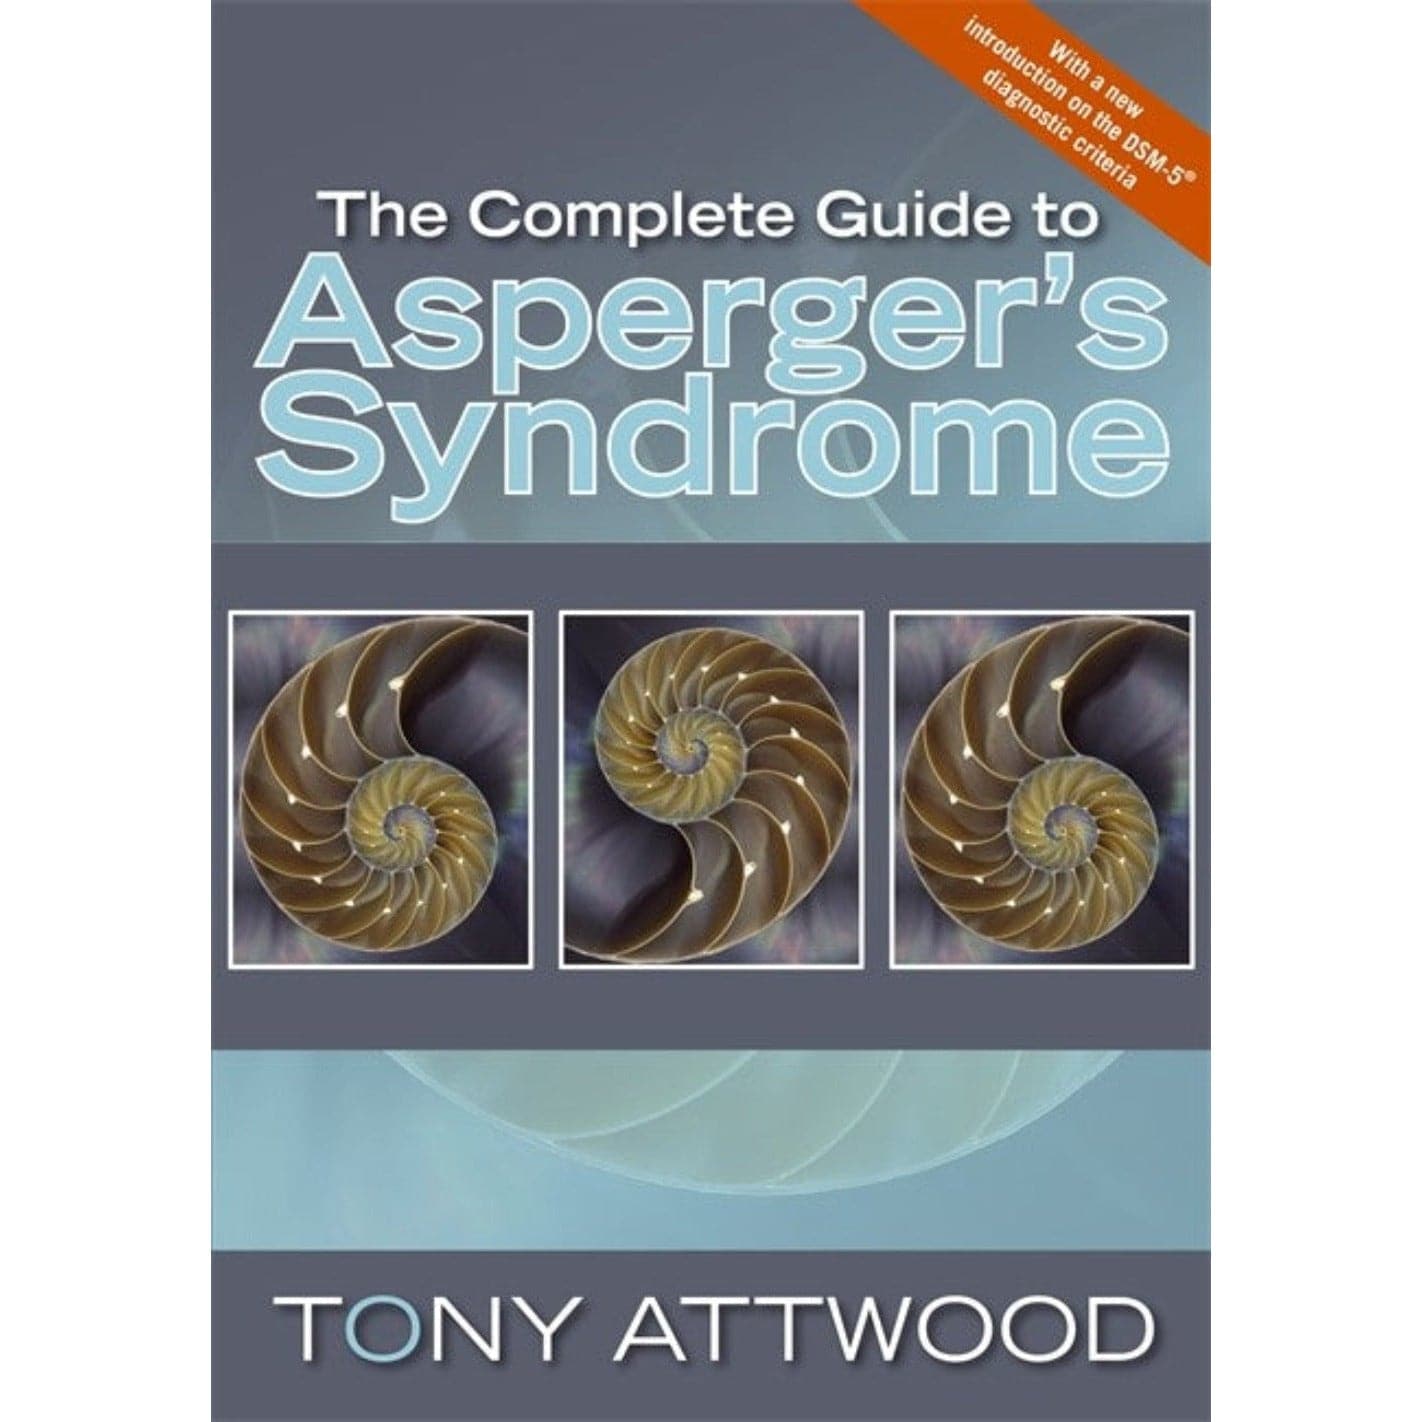 Complete Guide to Asperger's Syndrome - Sensory Circle